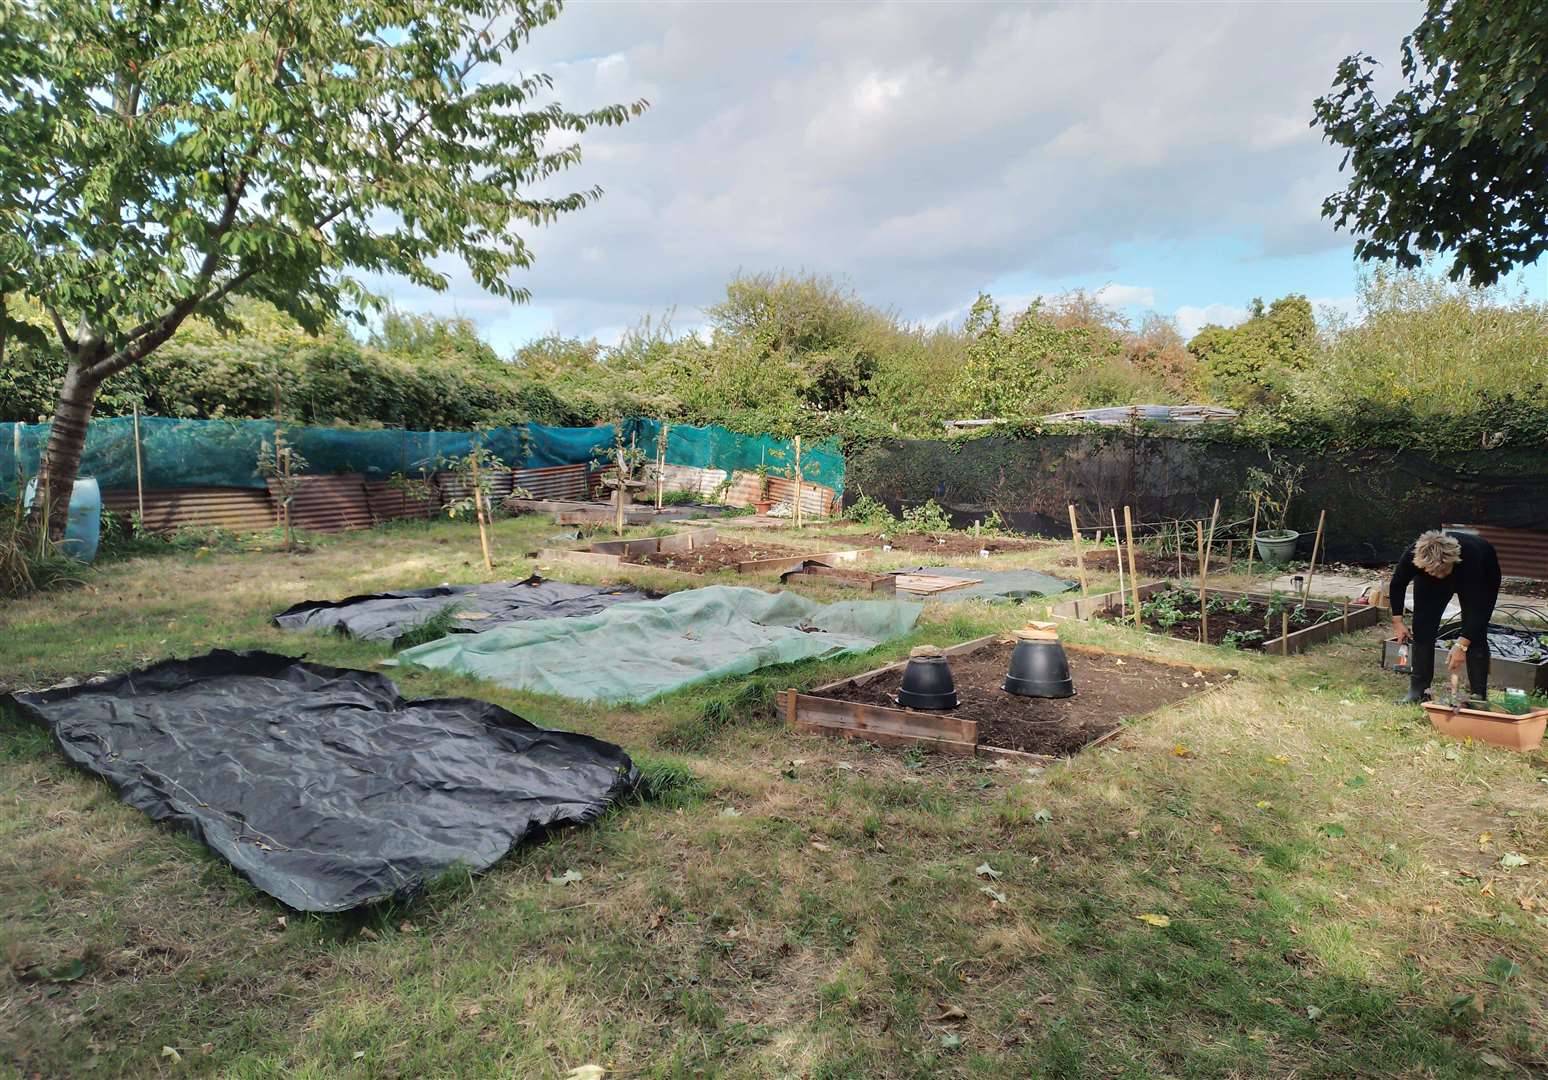 Cally Gale loves her allotment. Photo: Cally Gale